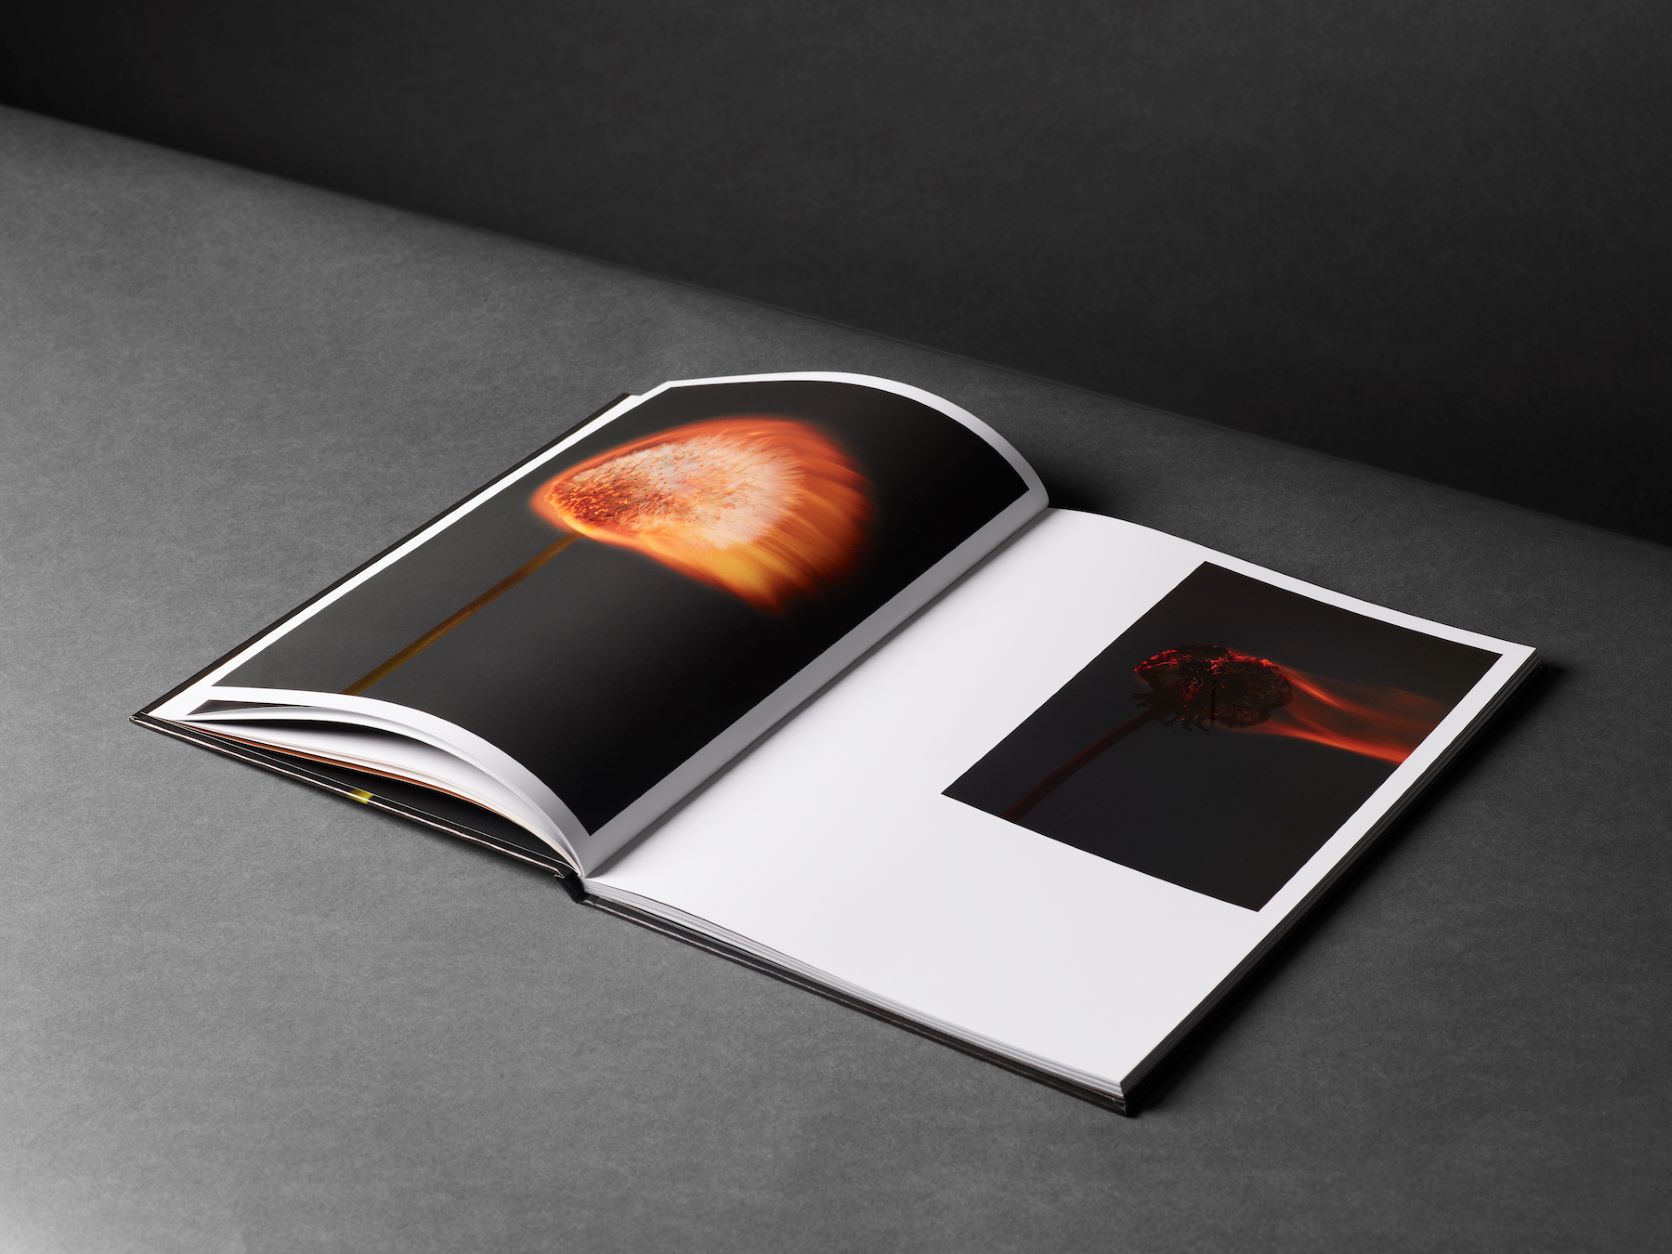 Fedrigoni Paper partners with world-renowned photographer for his latest book